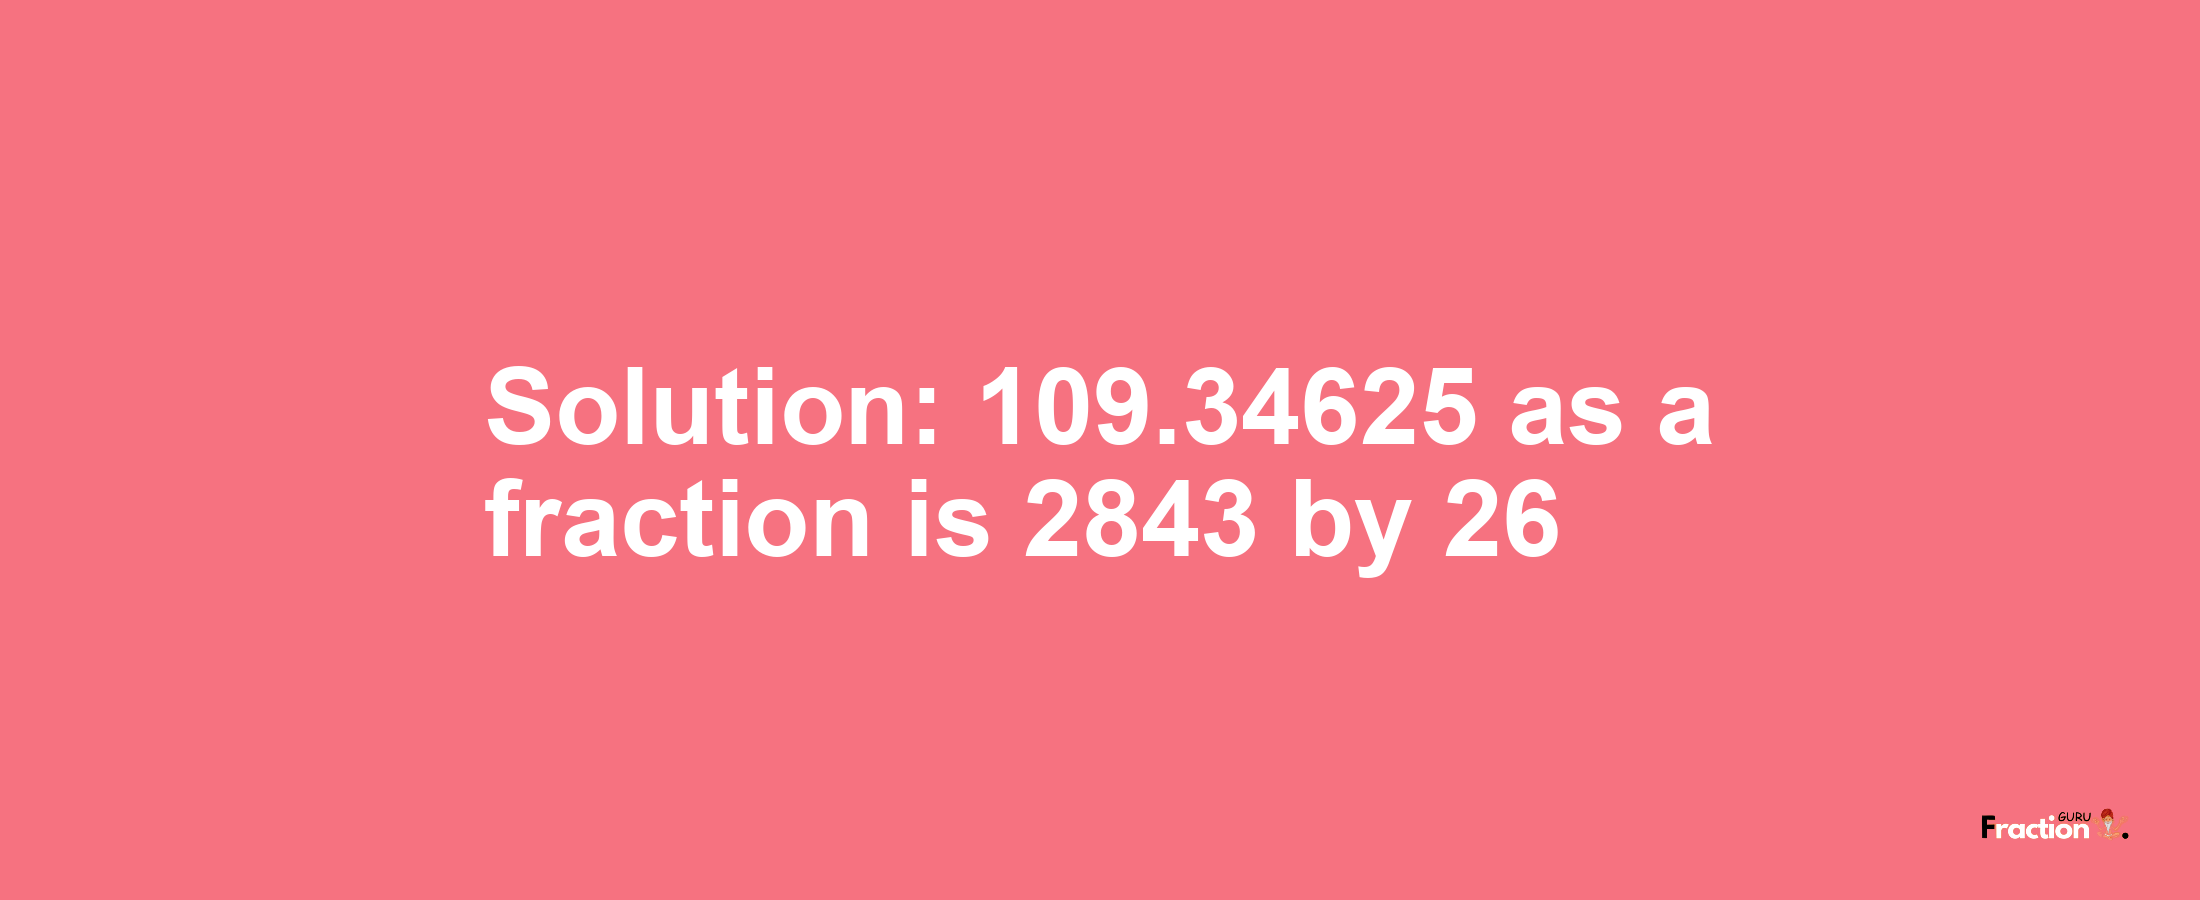 Solution:109.34625 as a fraction is 2843/26